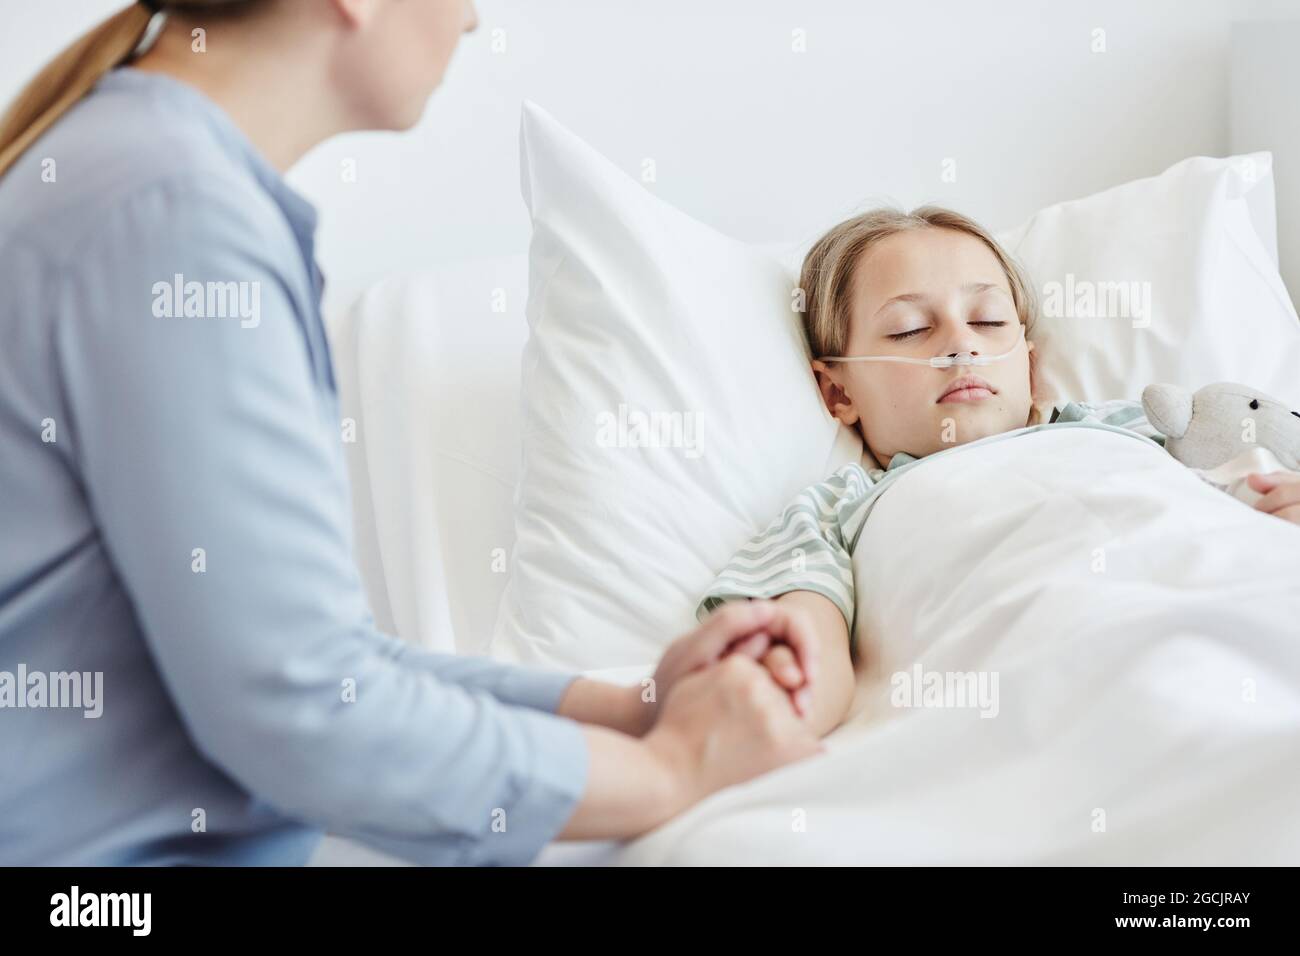 Portrait of caring mother holding hand of child in hospital room with oxygen support Stock Photo